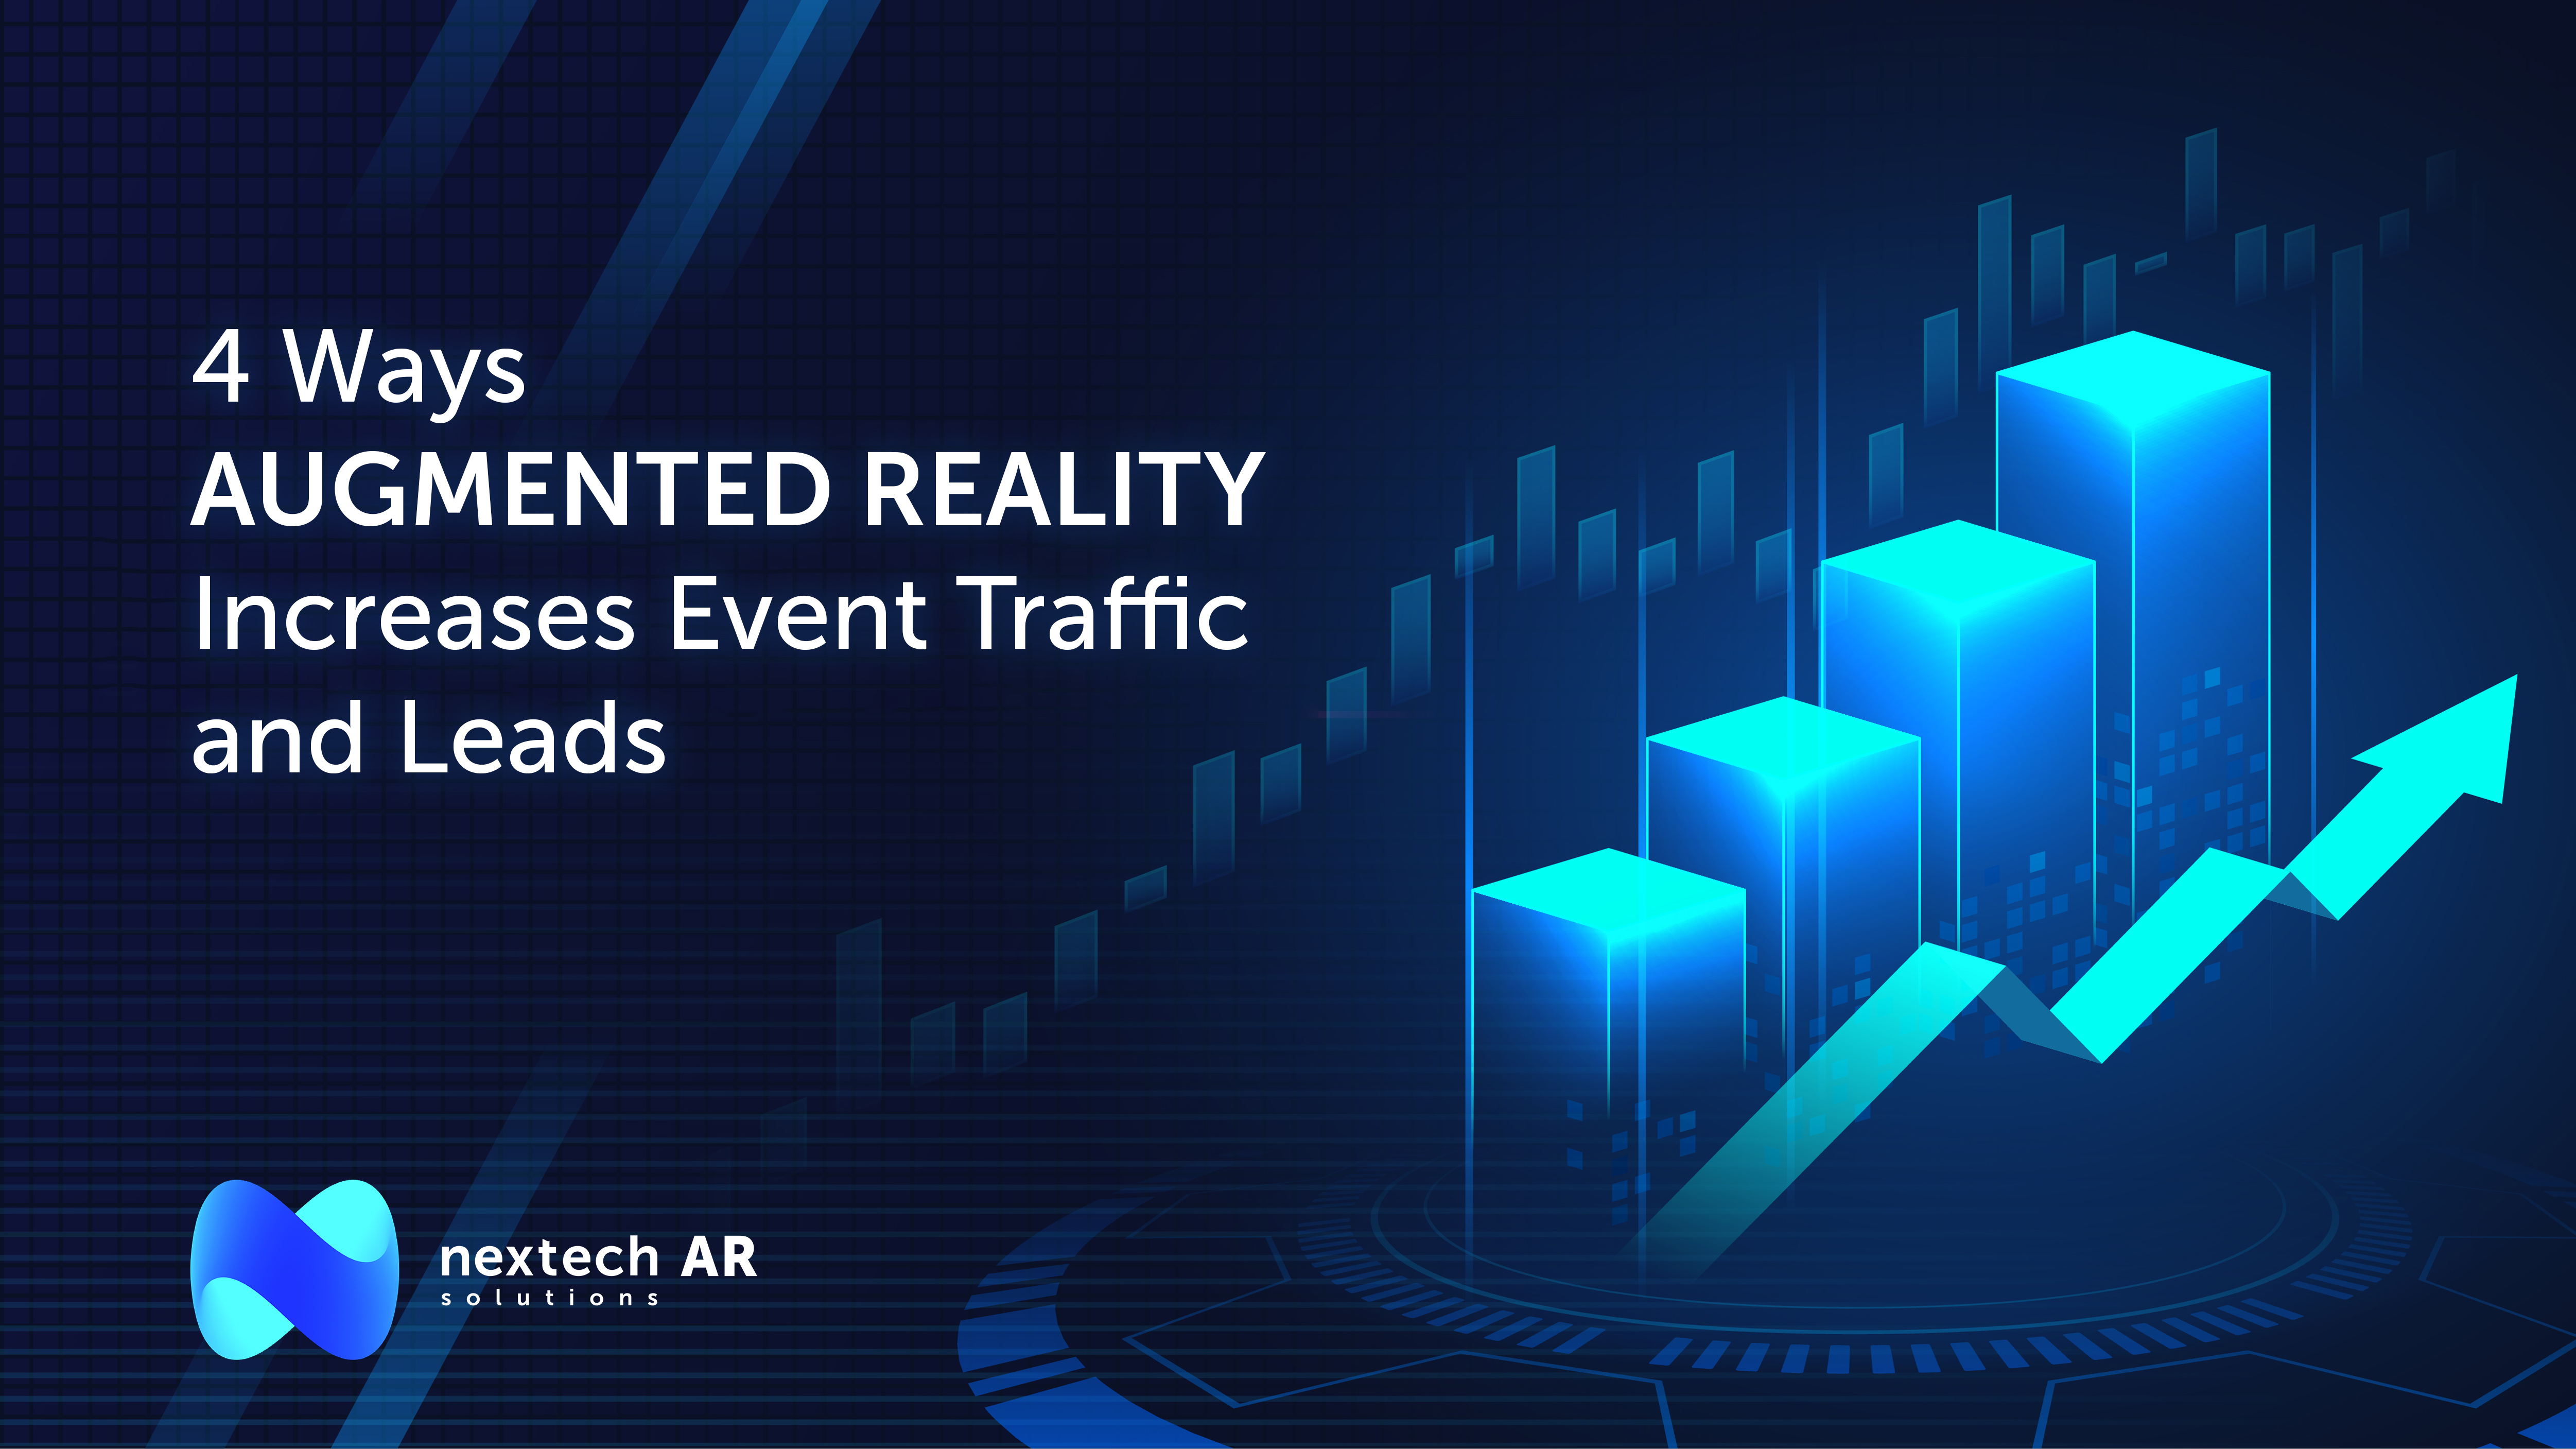 4 Ways Augmented Reality increases event traffic and leads